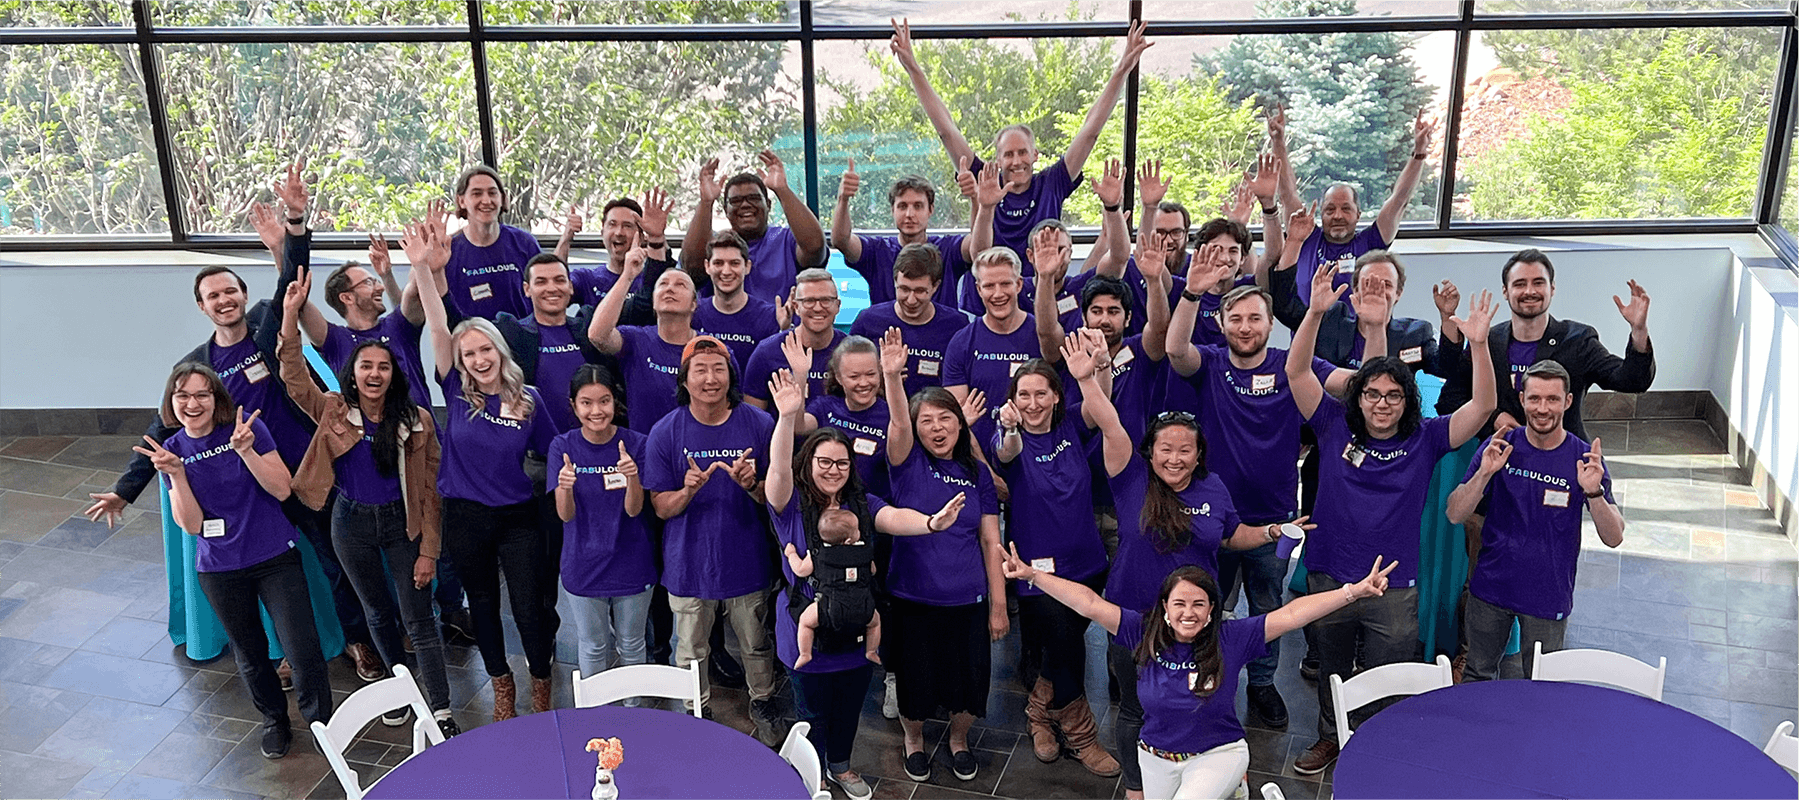 Orbit Fab team with hands outstretched and all wearing purple shirts